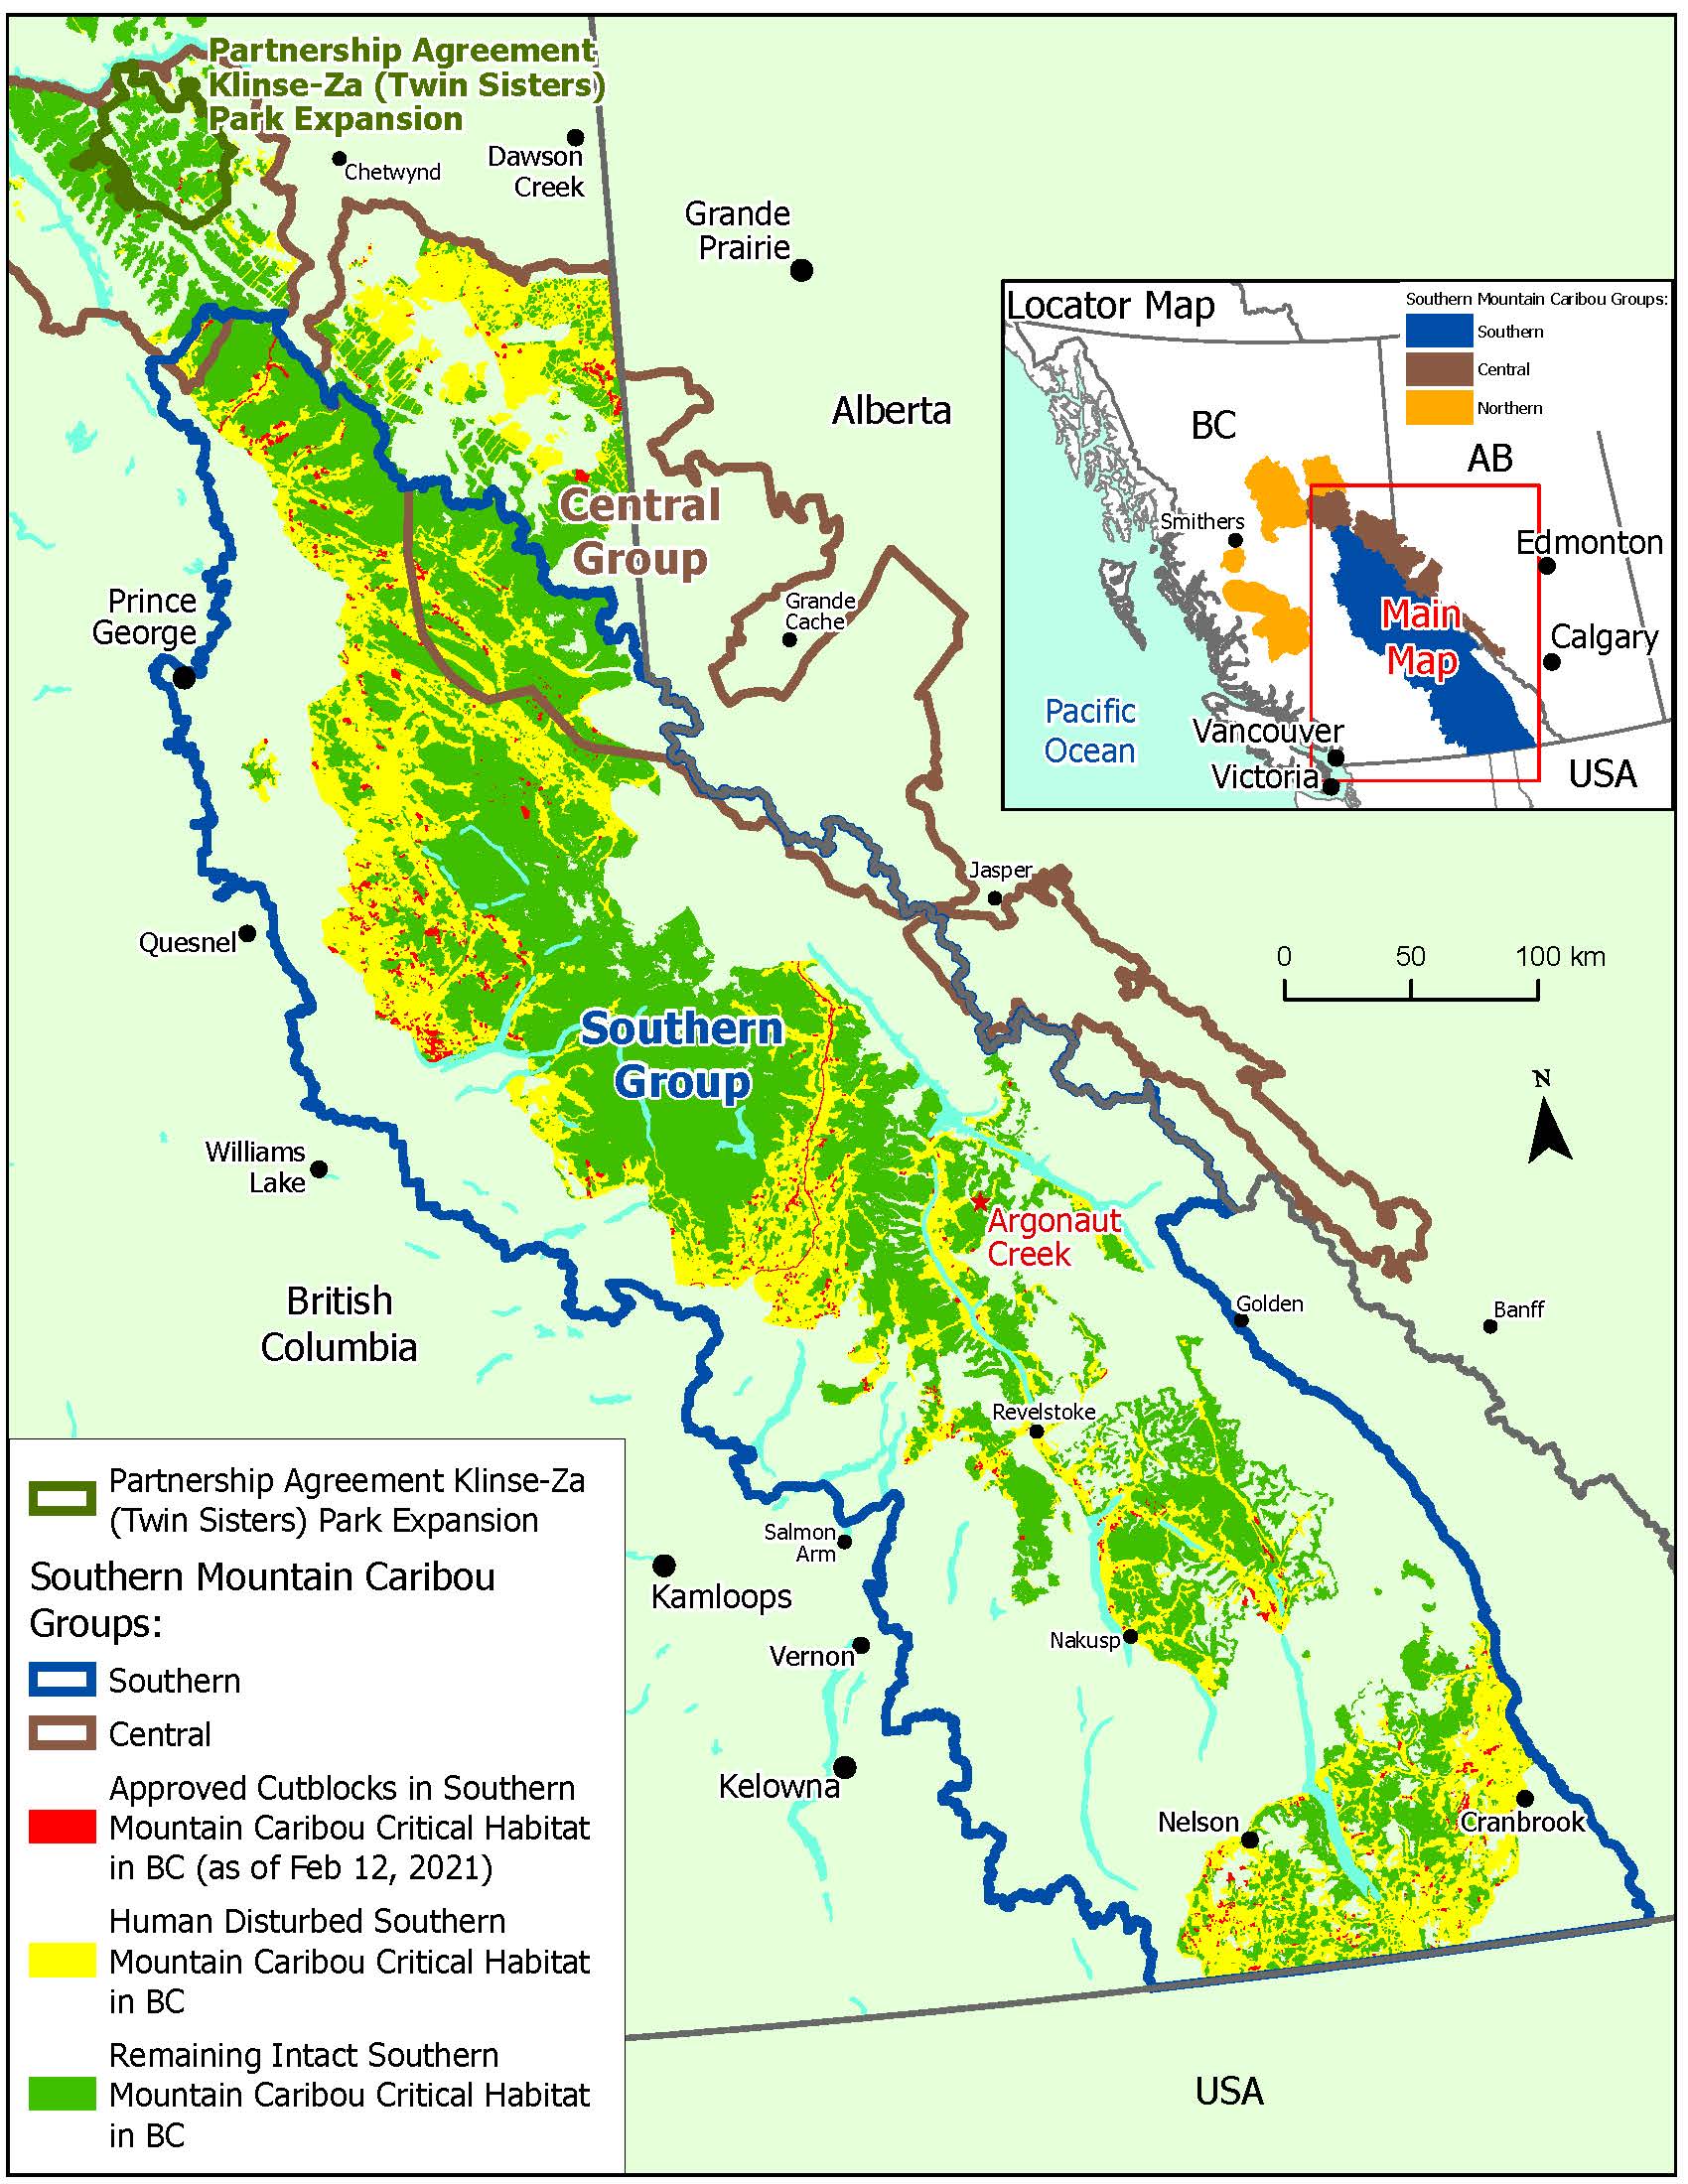 Southern and Central Groups of Southern Mountain Caribou, and their Critical Habitat in BC